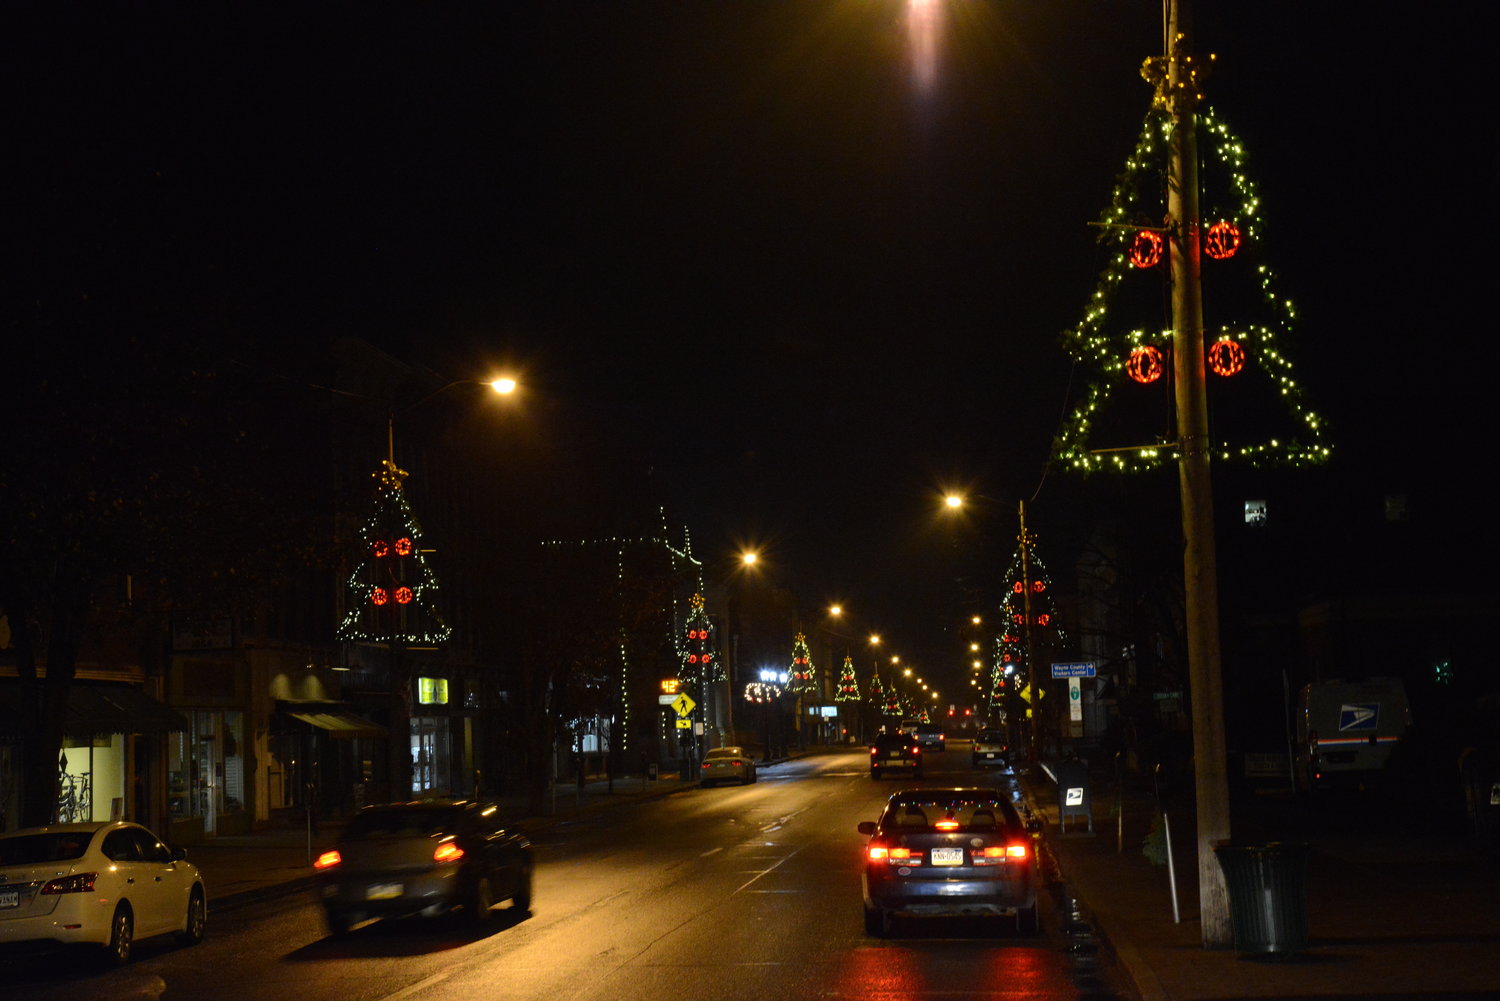 For years and years, these trees have lit the way of Main Street motorists and pedestrians through chilly winter nights.